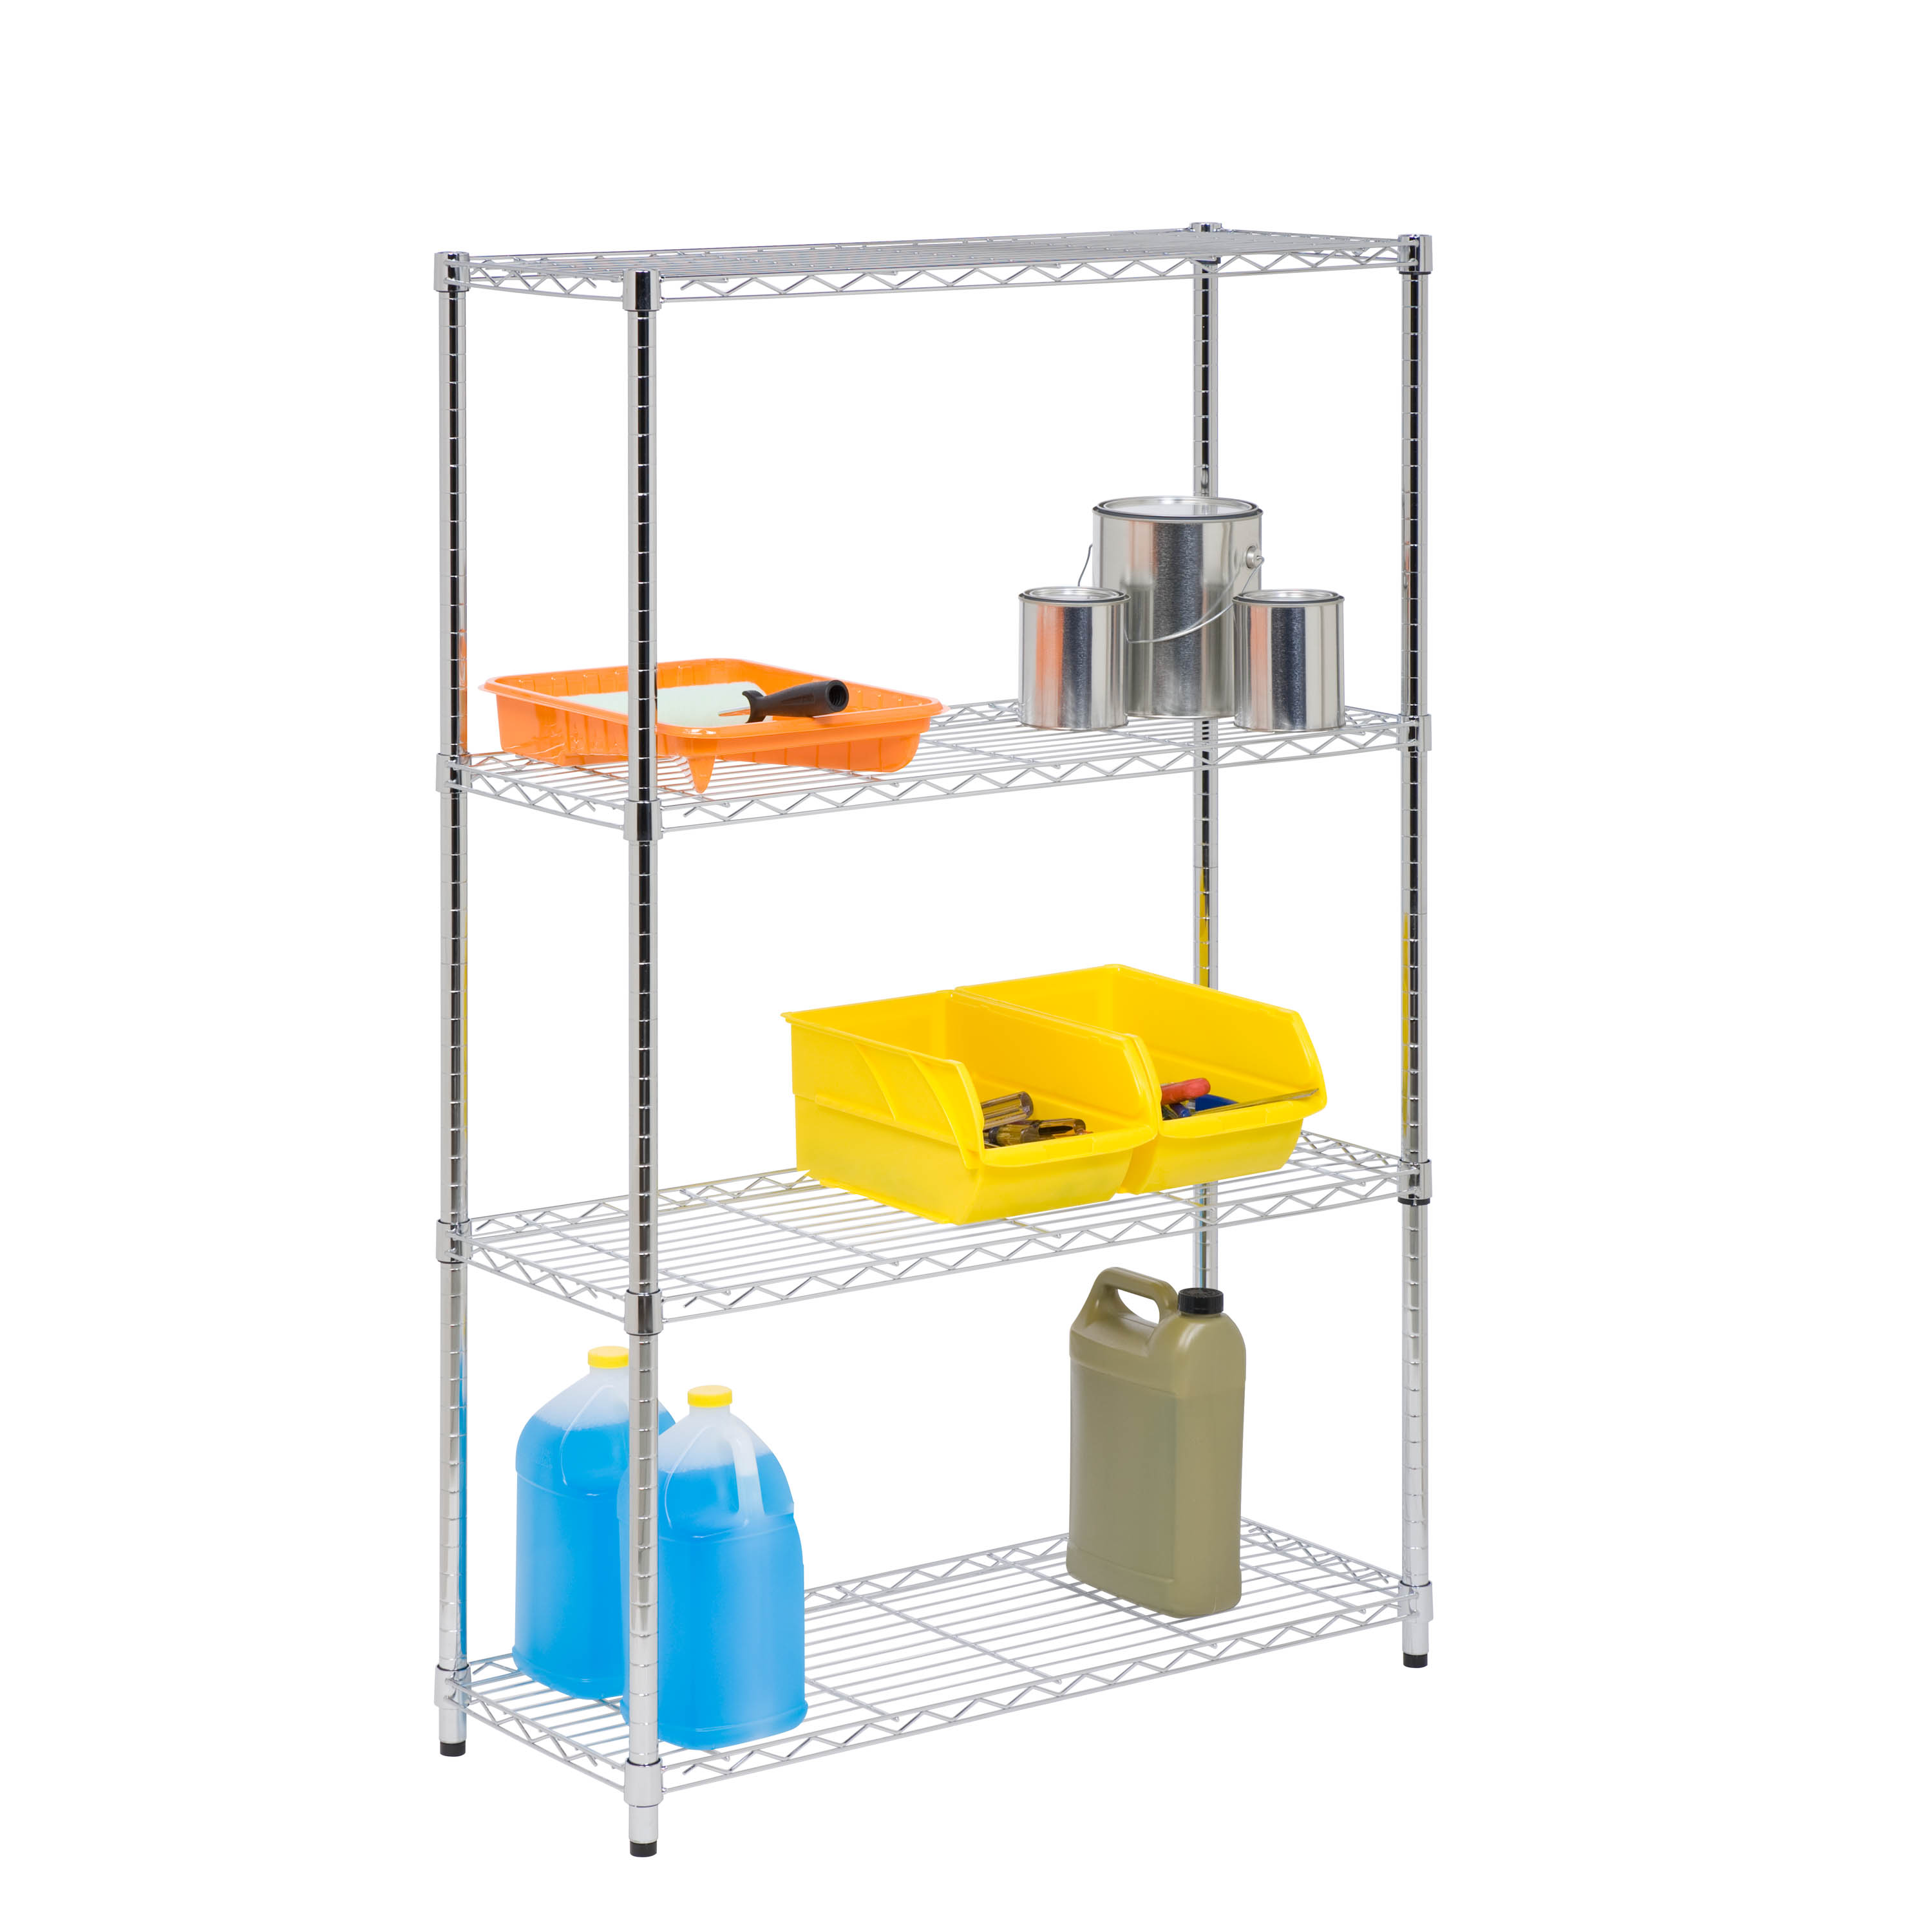 Honey Can Do 4-Tier Heavy-Duty Adjustable Shelving Unit With 250-Lb Weight Capacity, Chrome, Basement/Garage - image 3 of 5